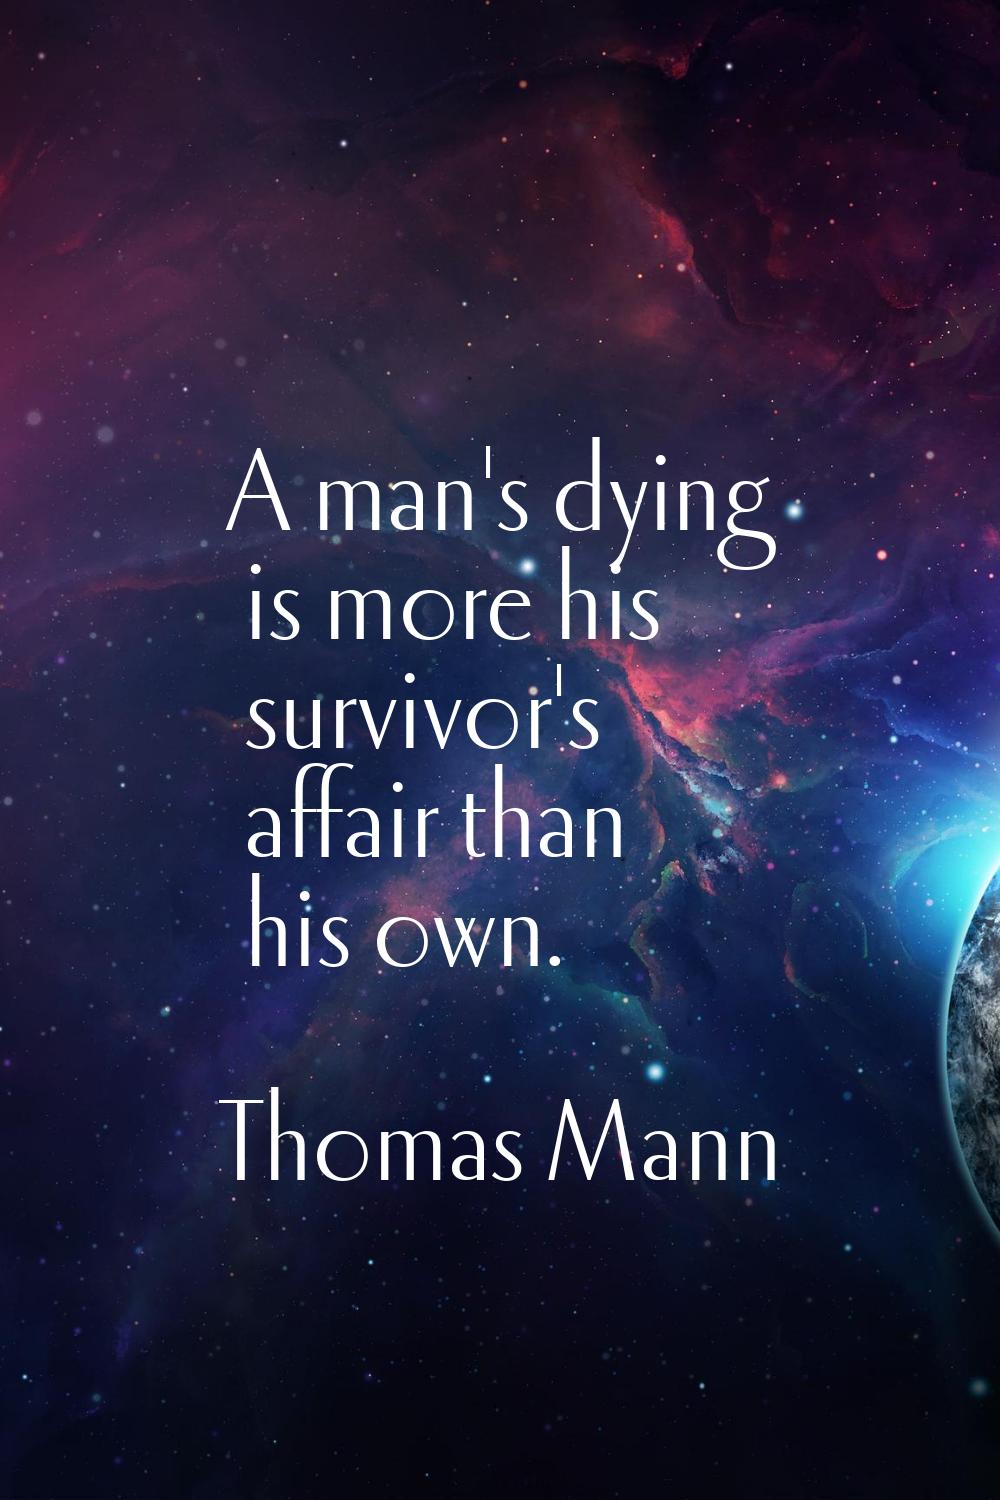 A man's dying is more his survivor's affair than his own.